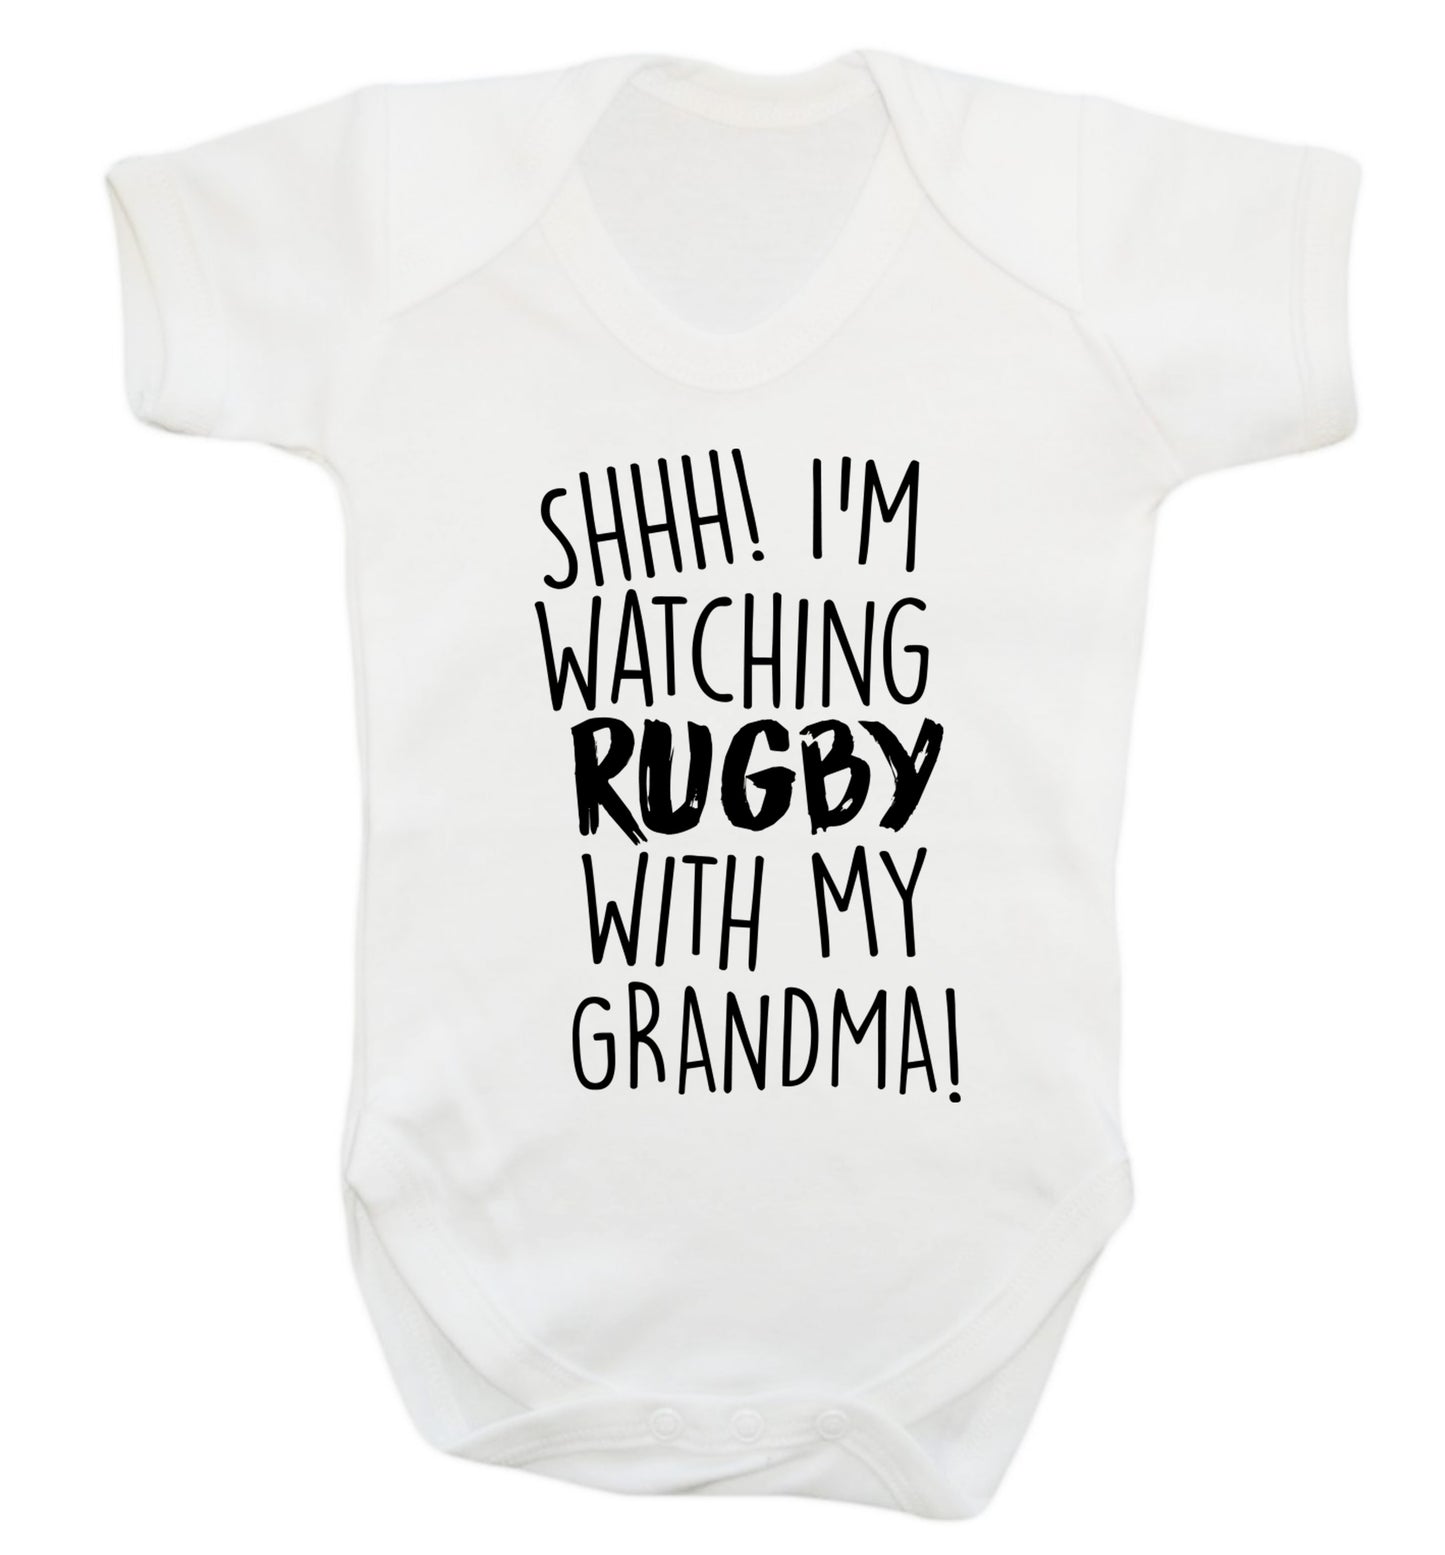 Shh I'm watching rugby with my grandma Baby Vest white 18-24 months